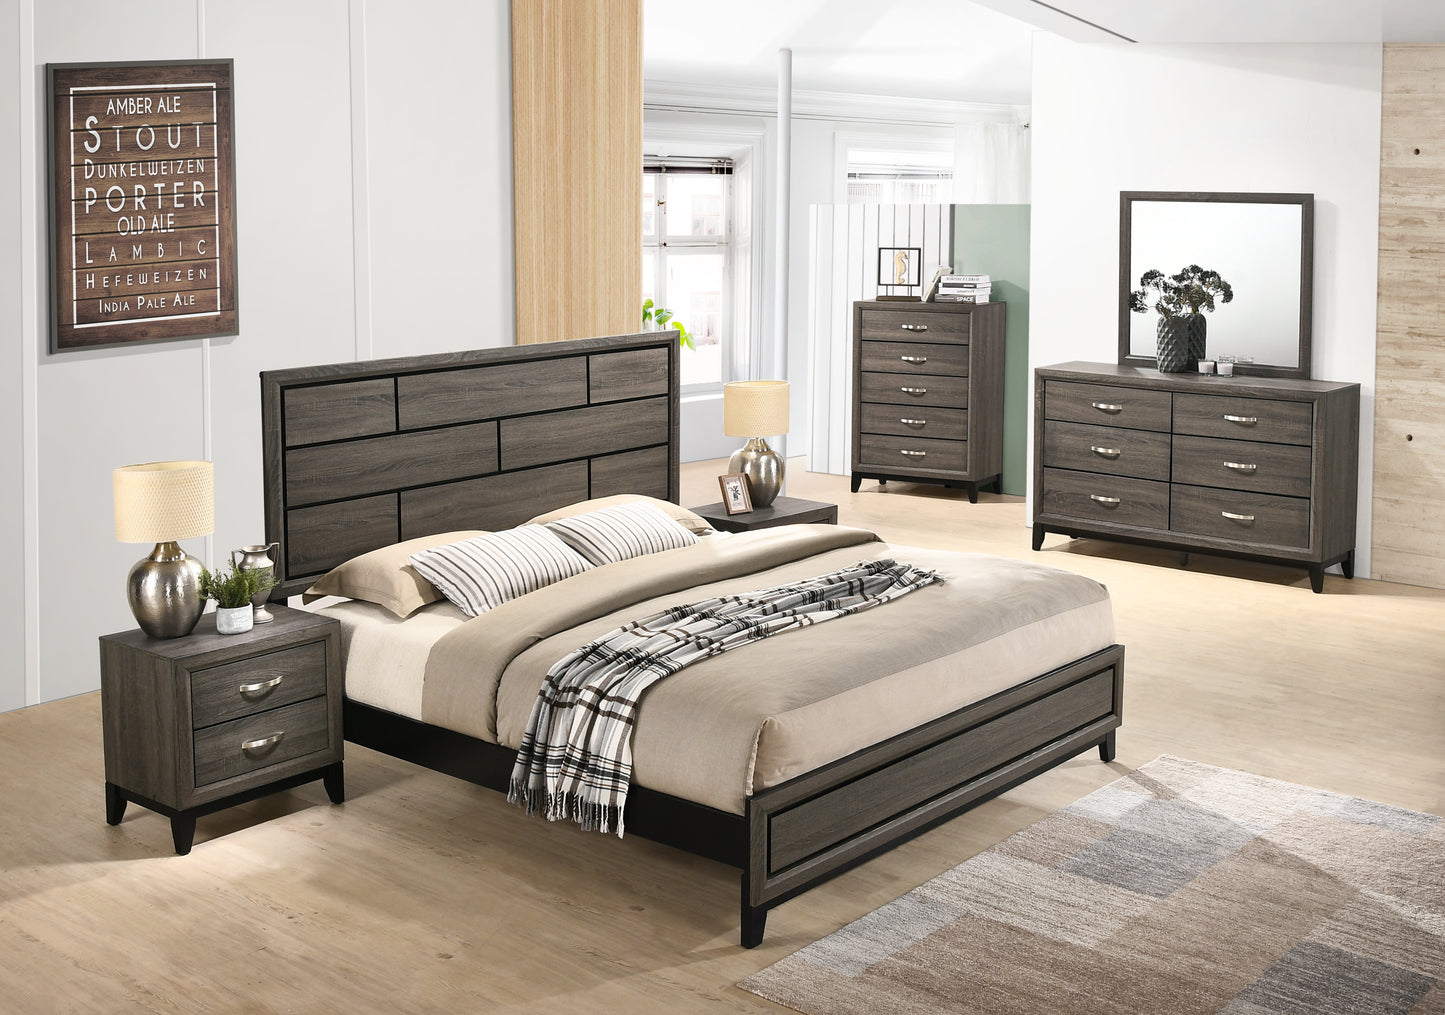 Stout Contemporary Panel Bedroom Collection